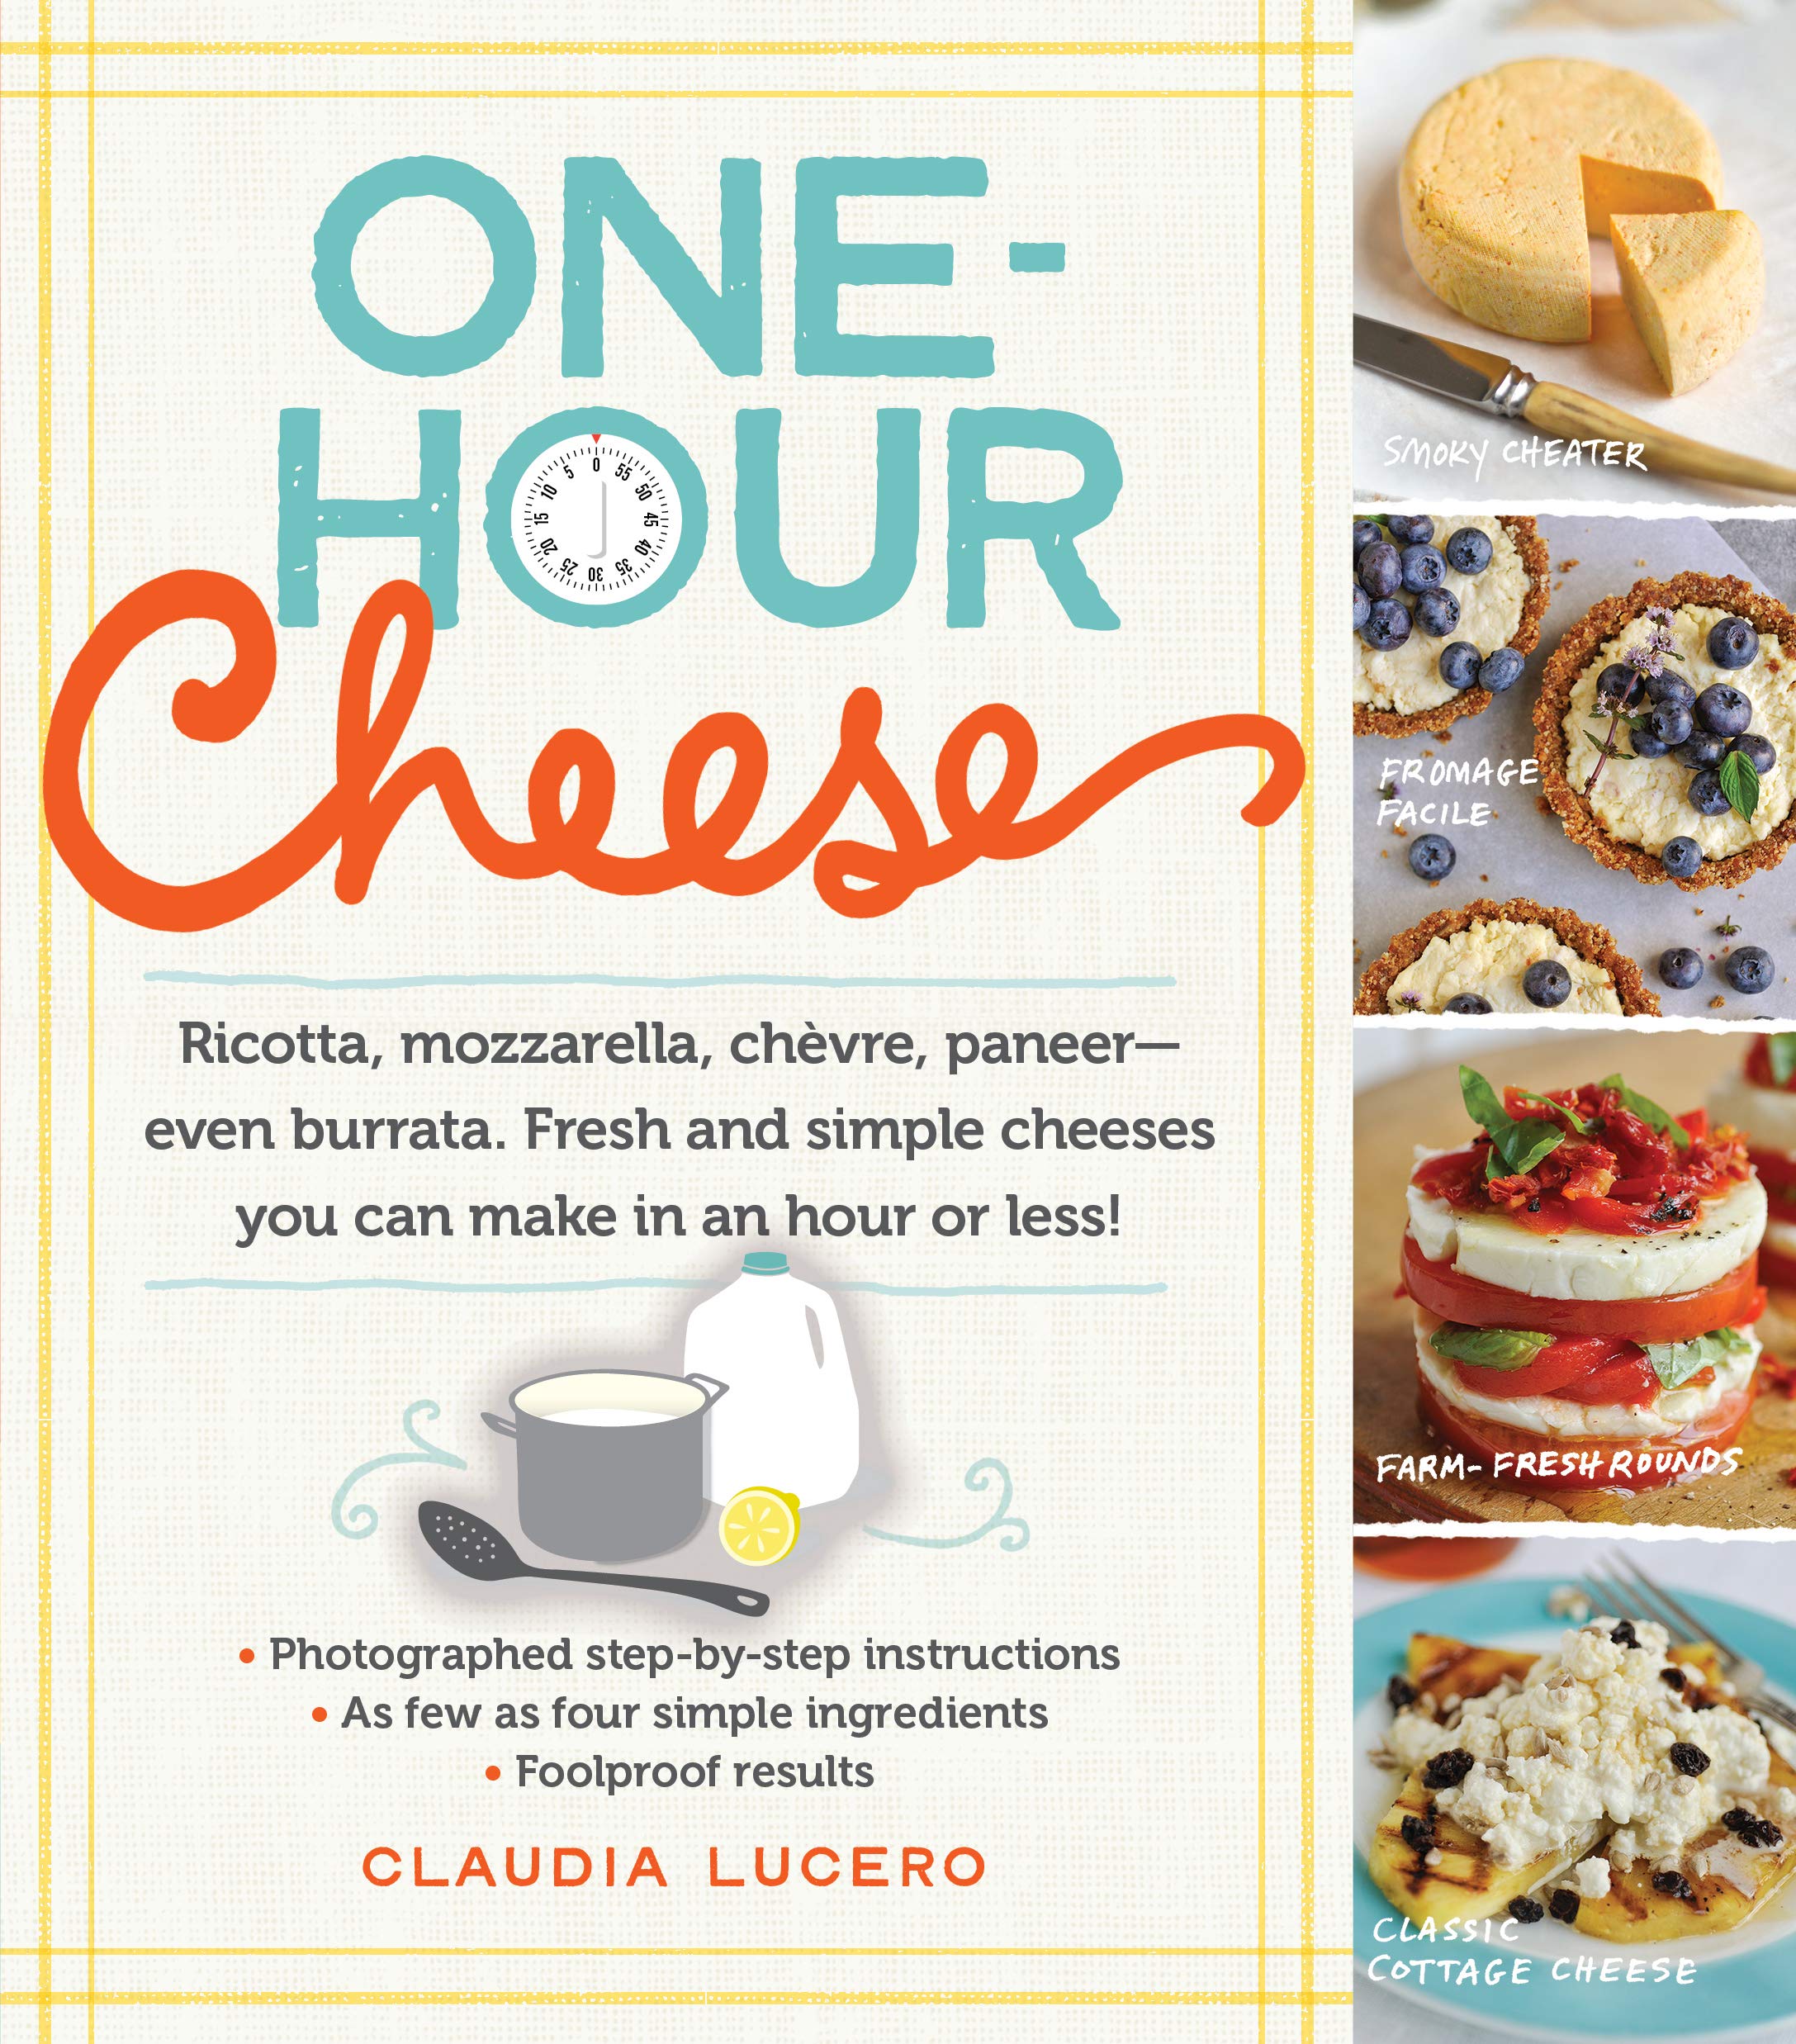 One-Hour Cheese: Fresh and Simple Cheeses You Can Make in an Hour or Less! (Claudia Lucero)